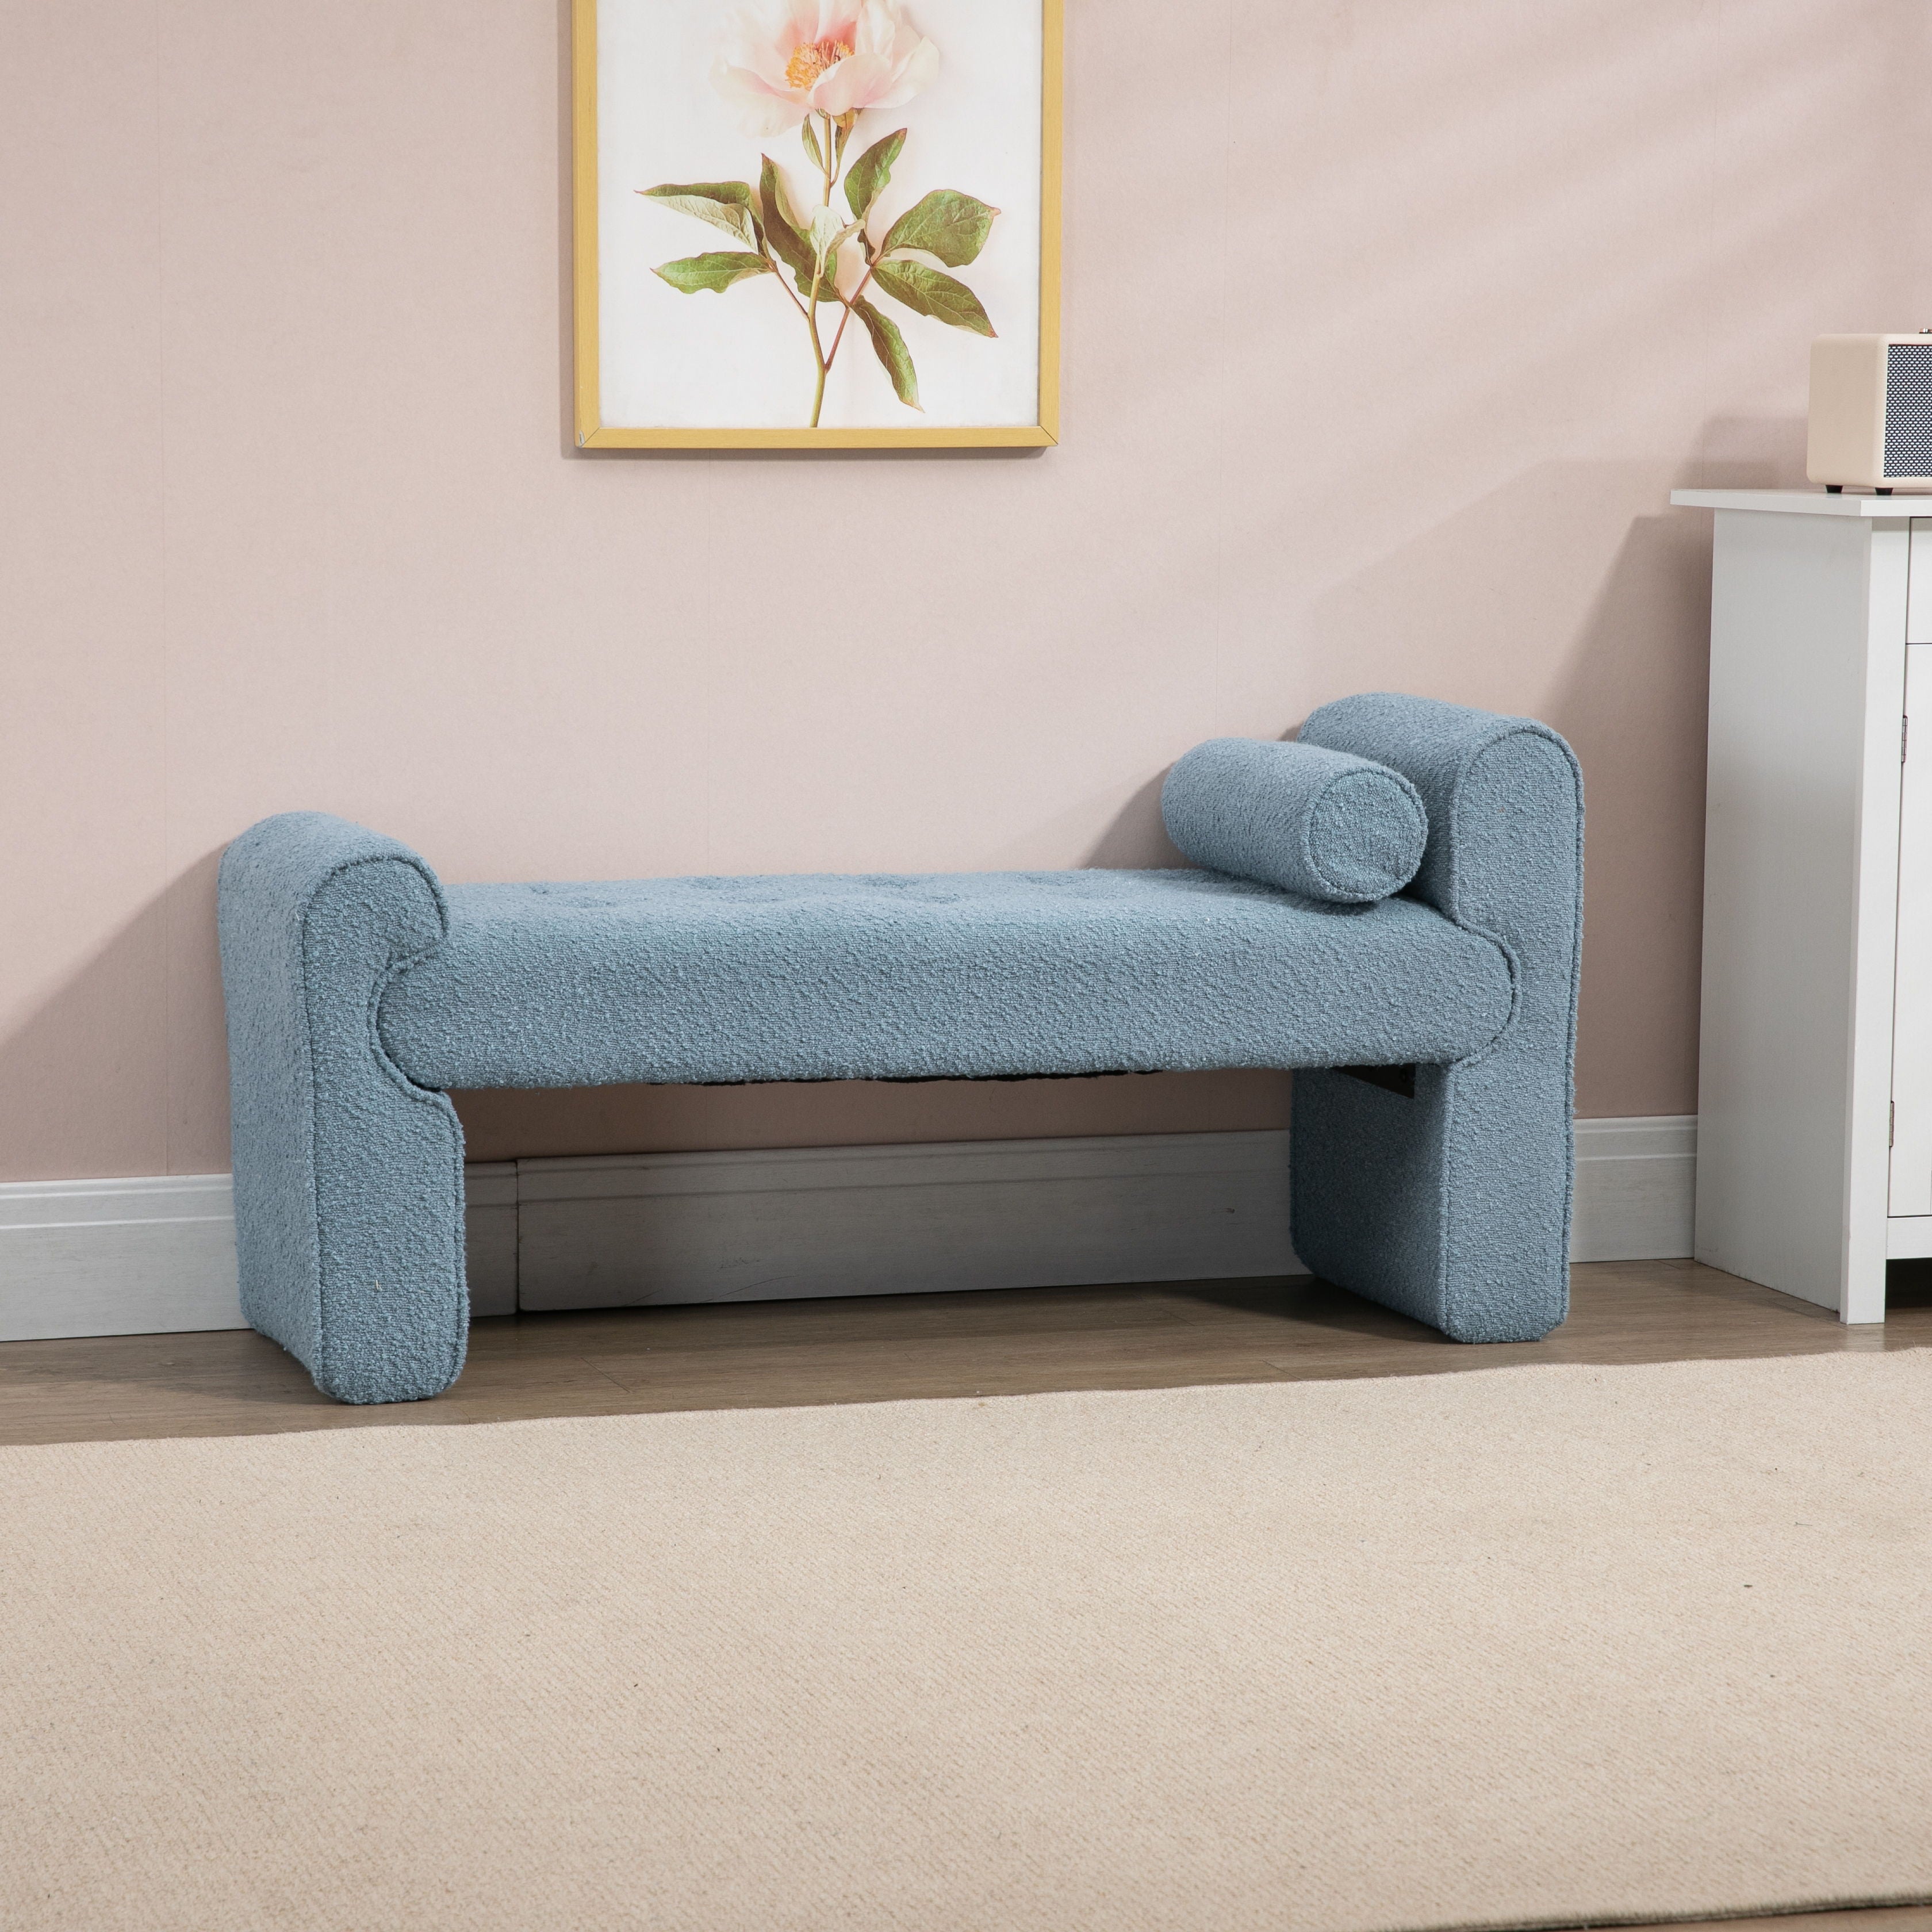 Coolmore Modern Ottoman Bench, Bed Stool Made Of Loop Gauze, End Bed Bench, Footrest For Bedroom, End Of Bed, Hallway